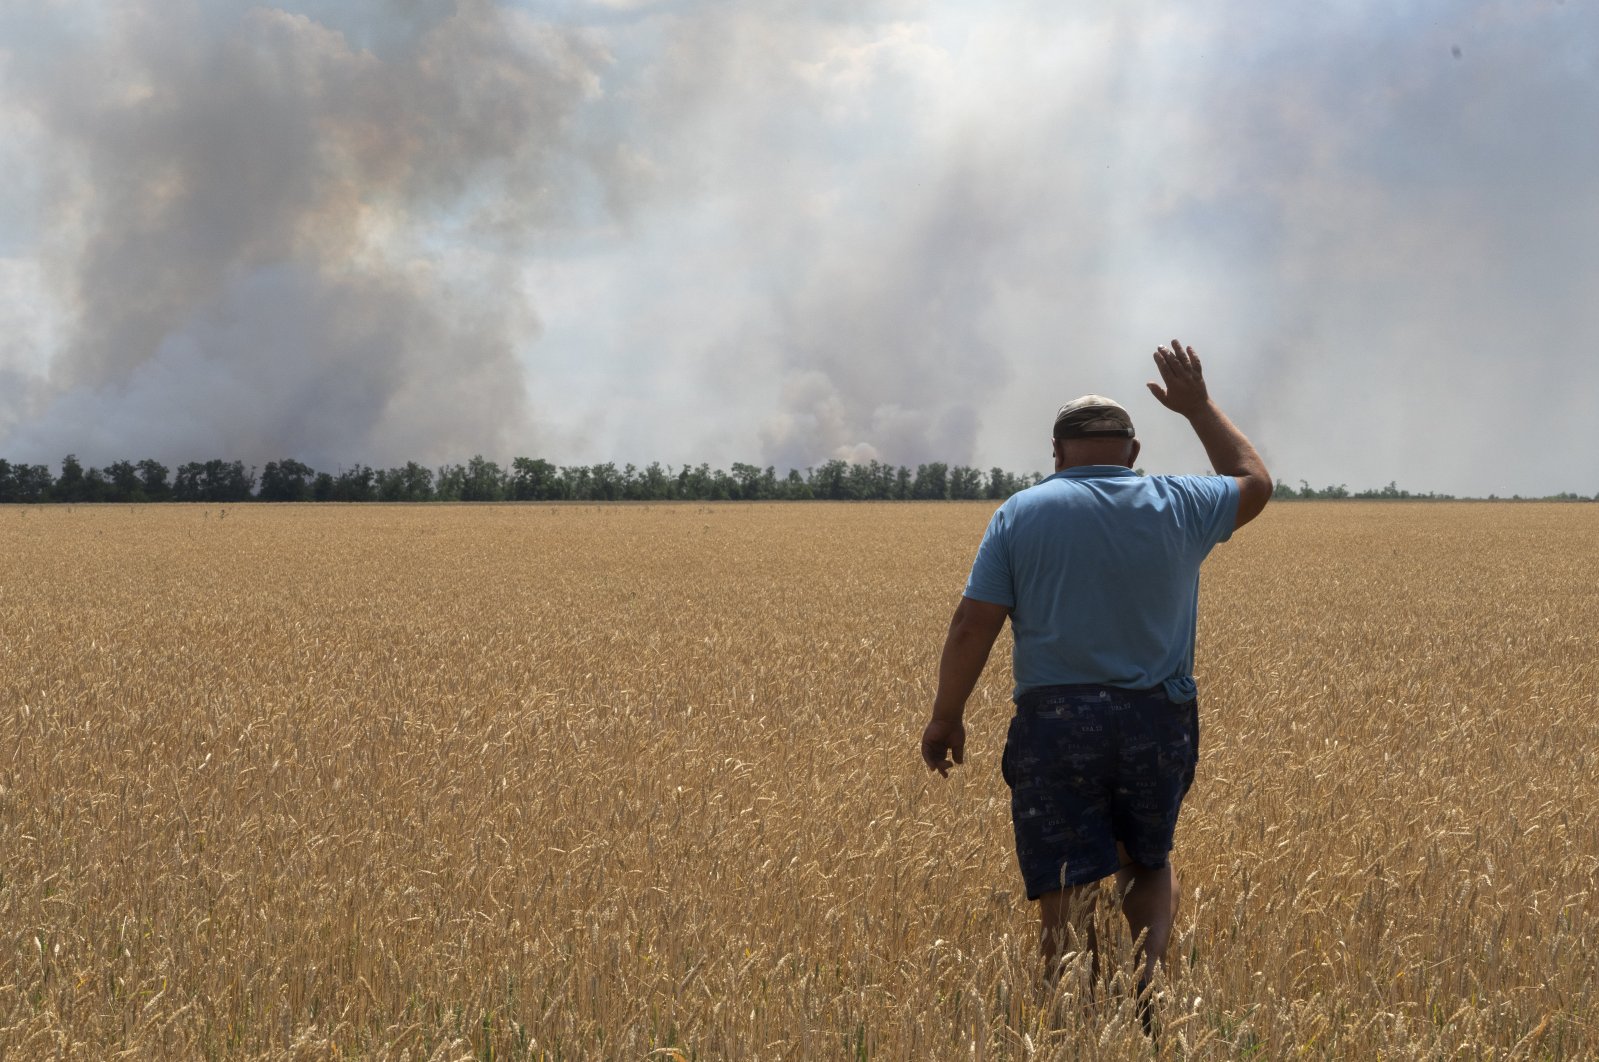 A farmer reacts as he looks at his burning field caused by the fighting at the front line in the Dnipropetrovsk region, Ukraine, July 4, 2022. (AP Photo)